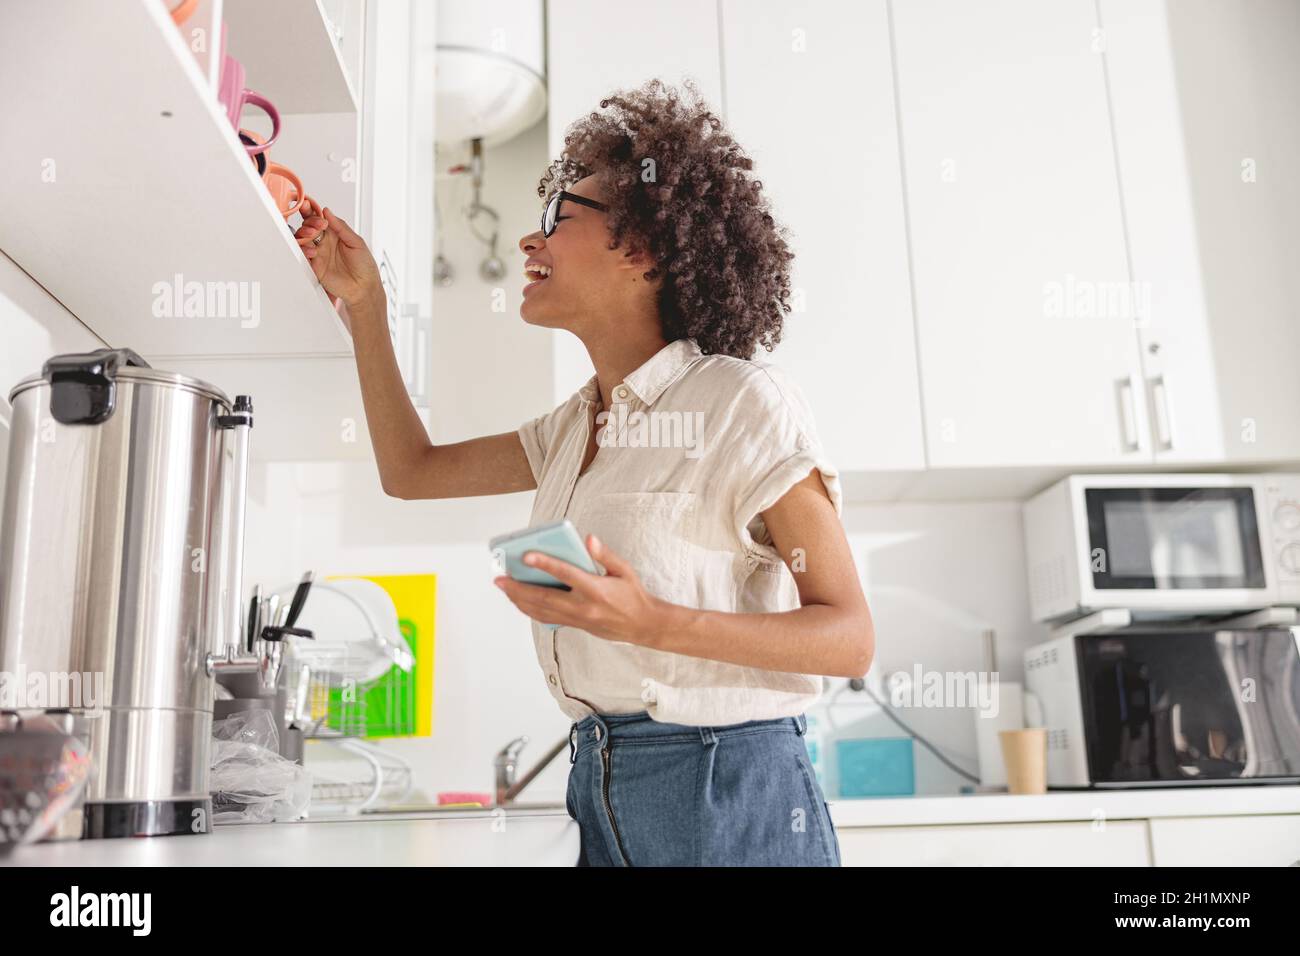 Pretty young woman taking a cup off the shelf Stock Photo